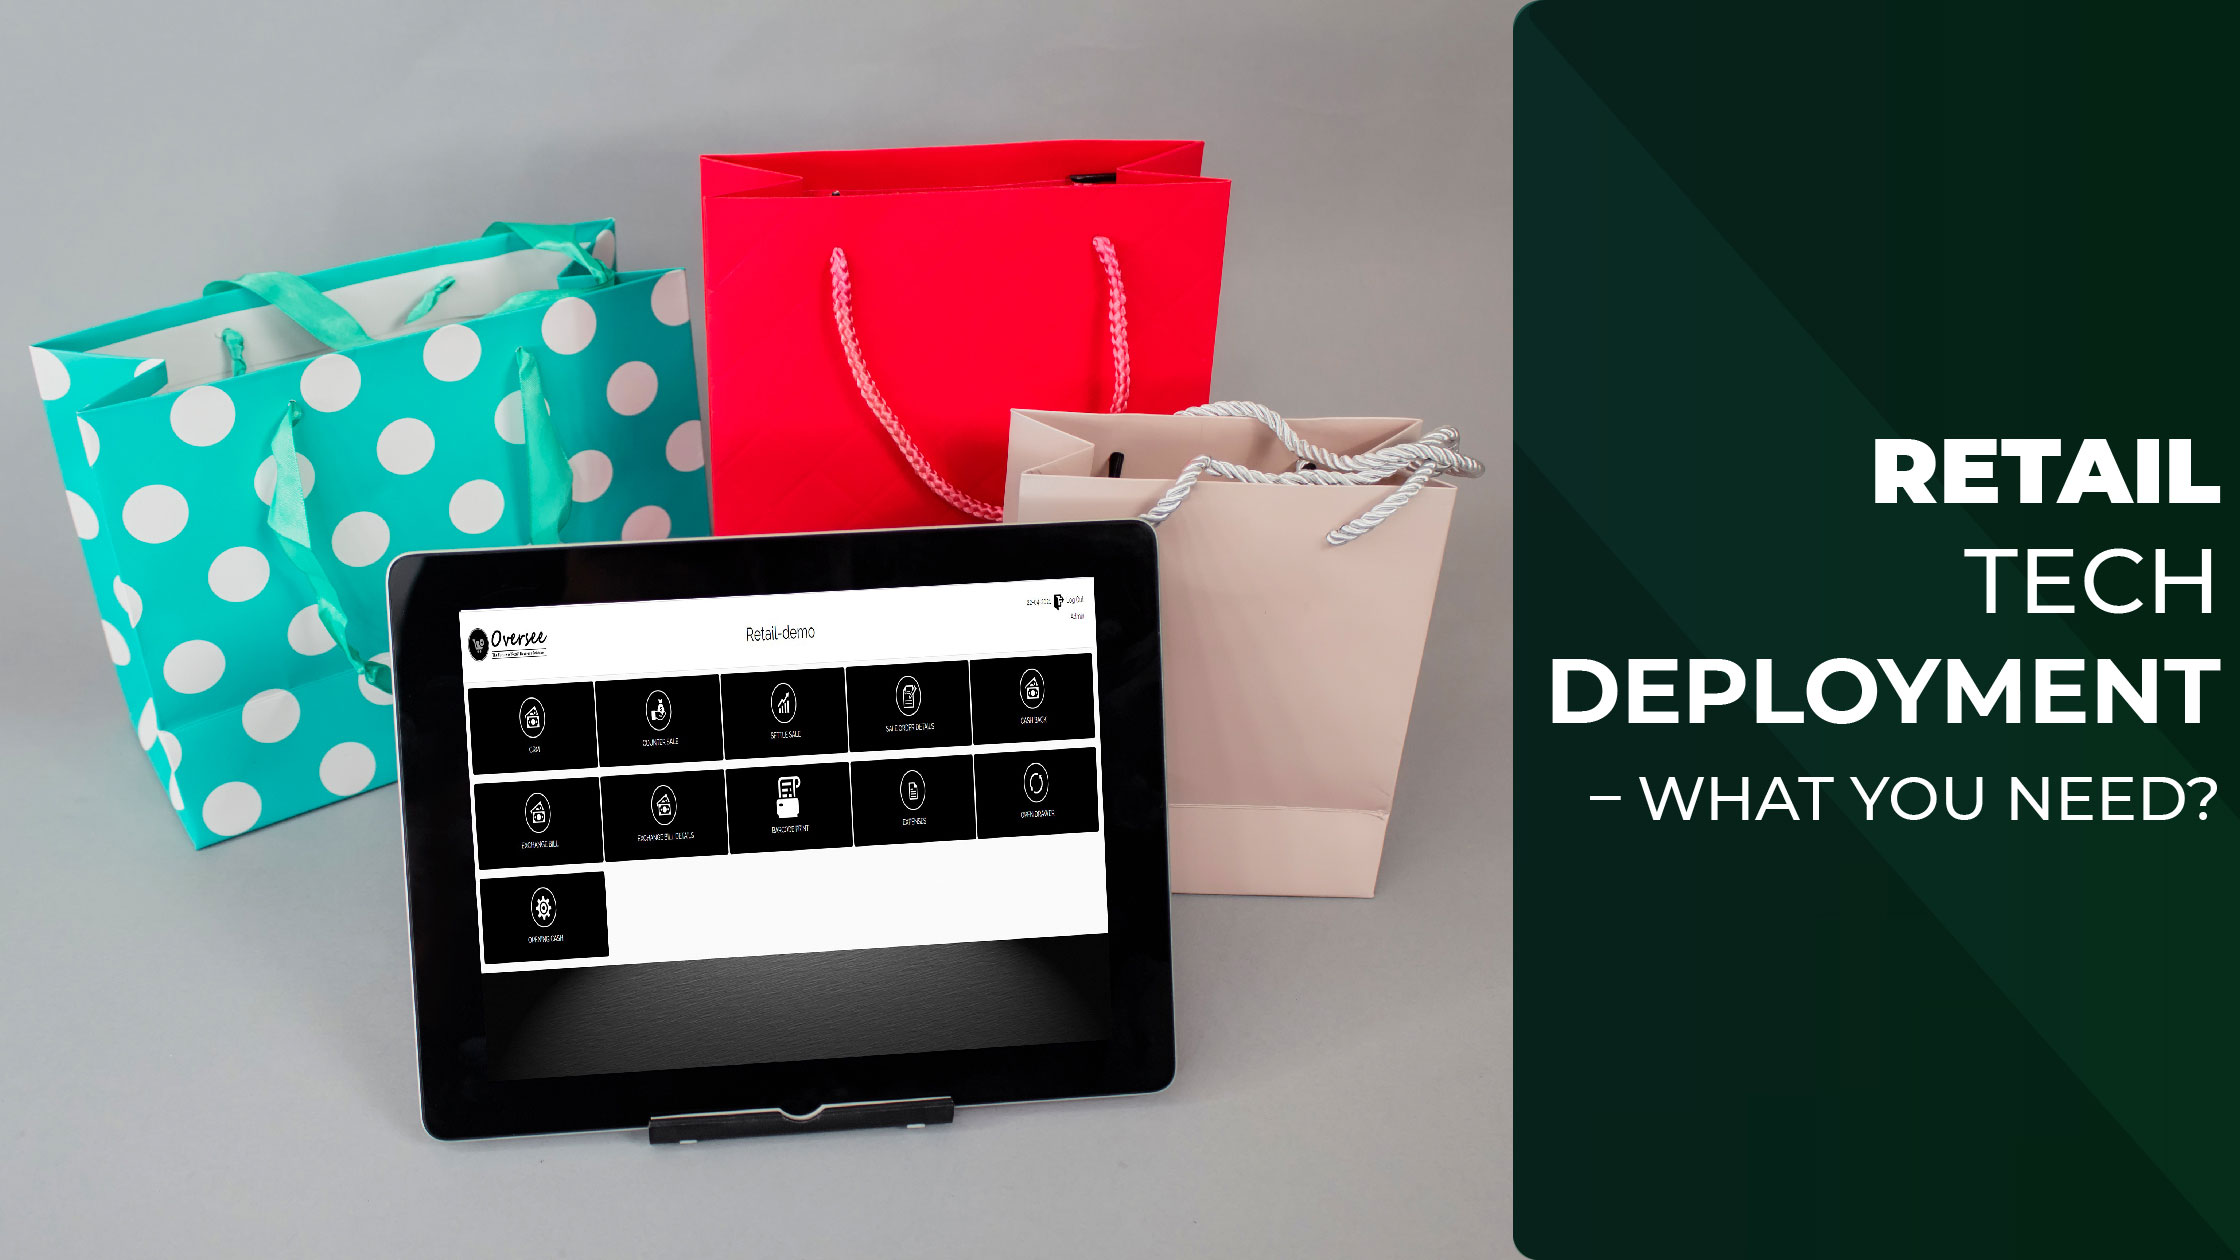 Retail Tech Deployment – What you need?